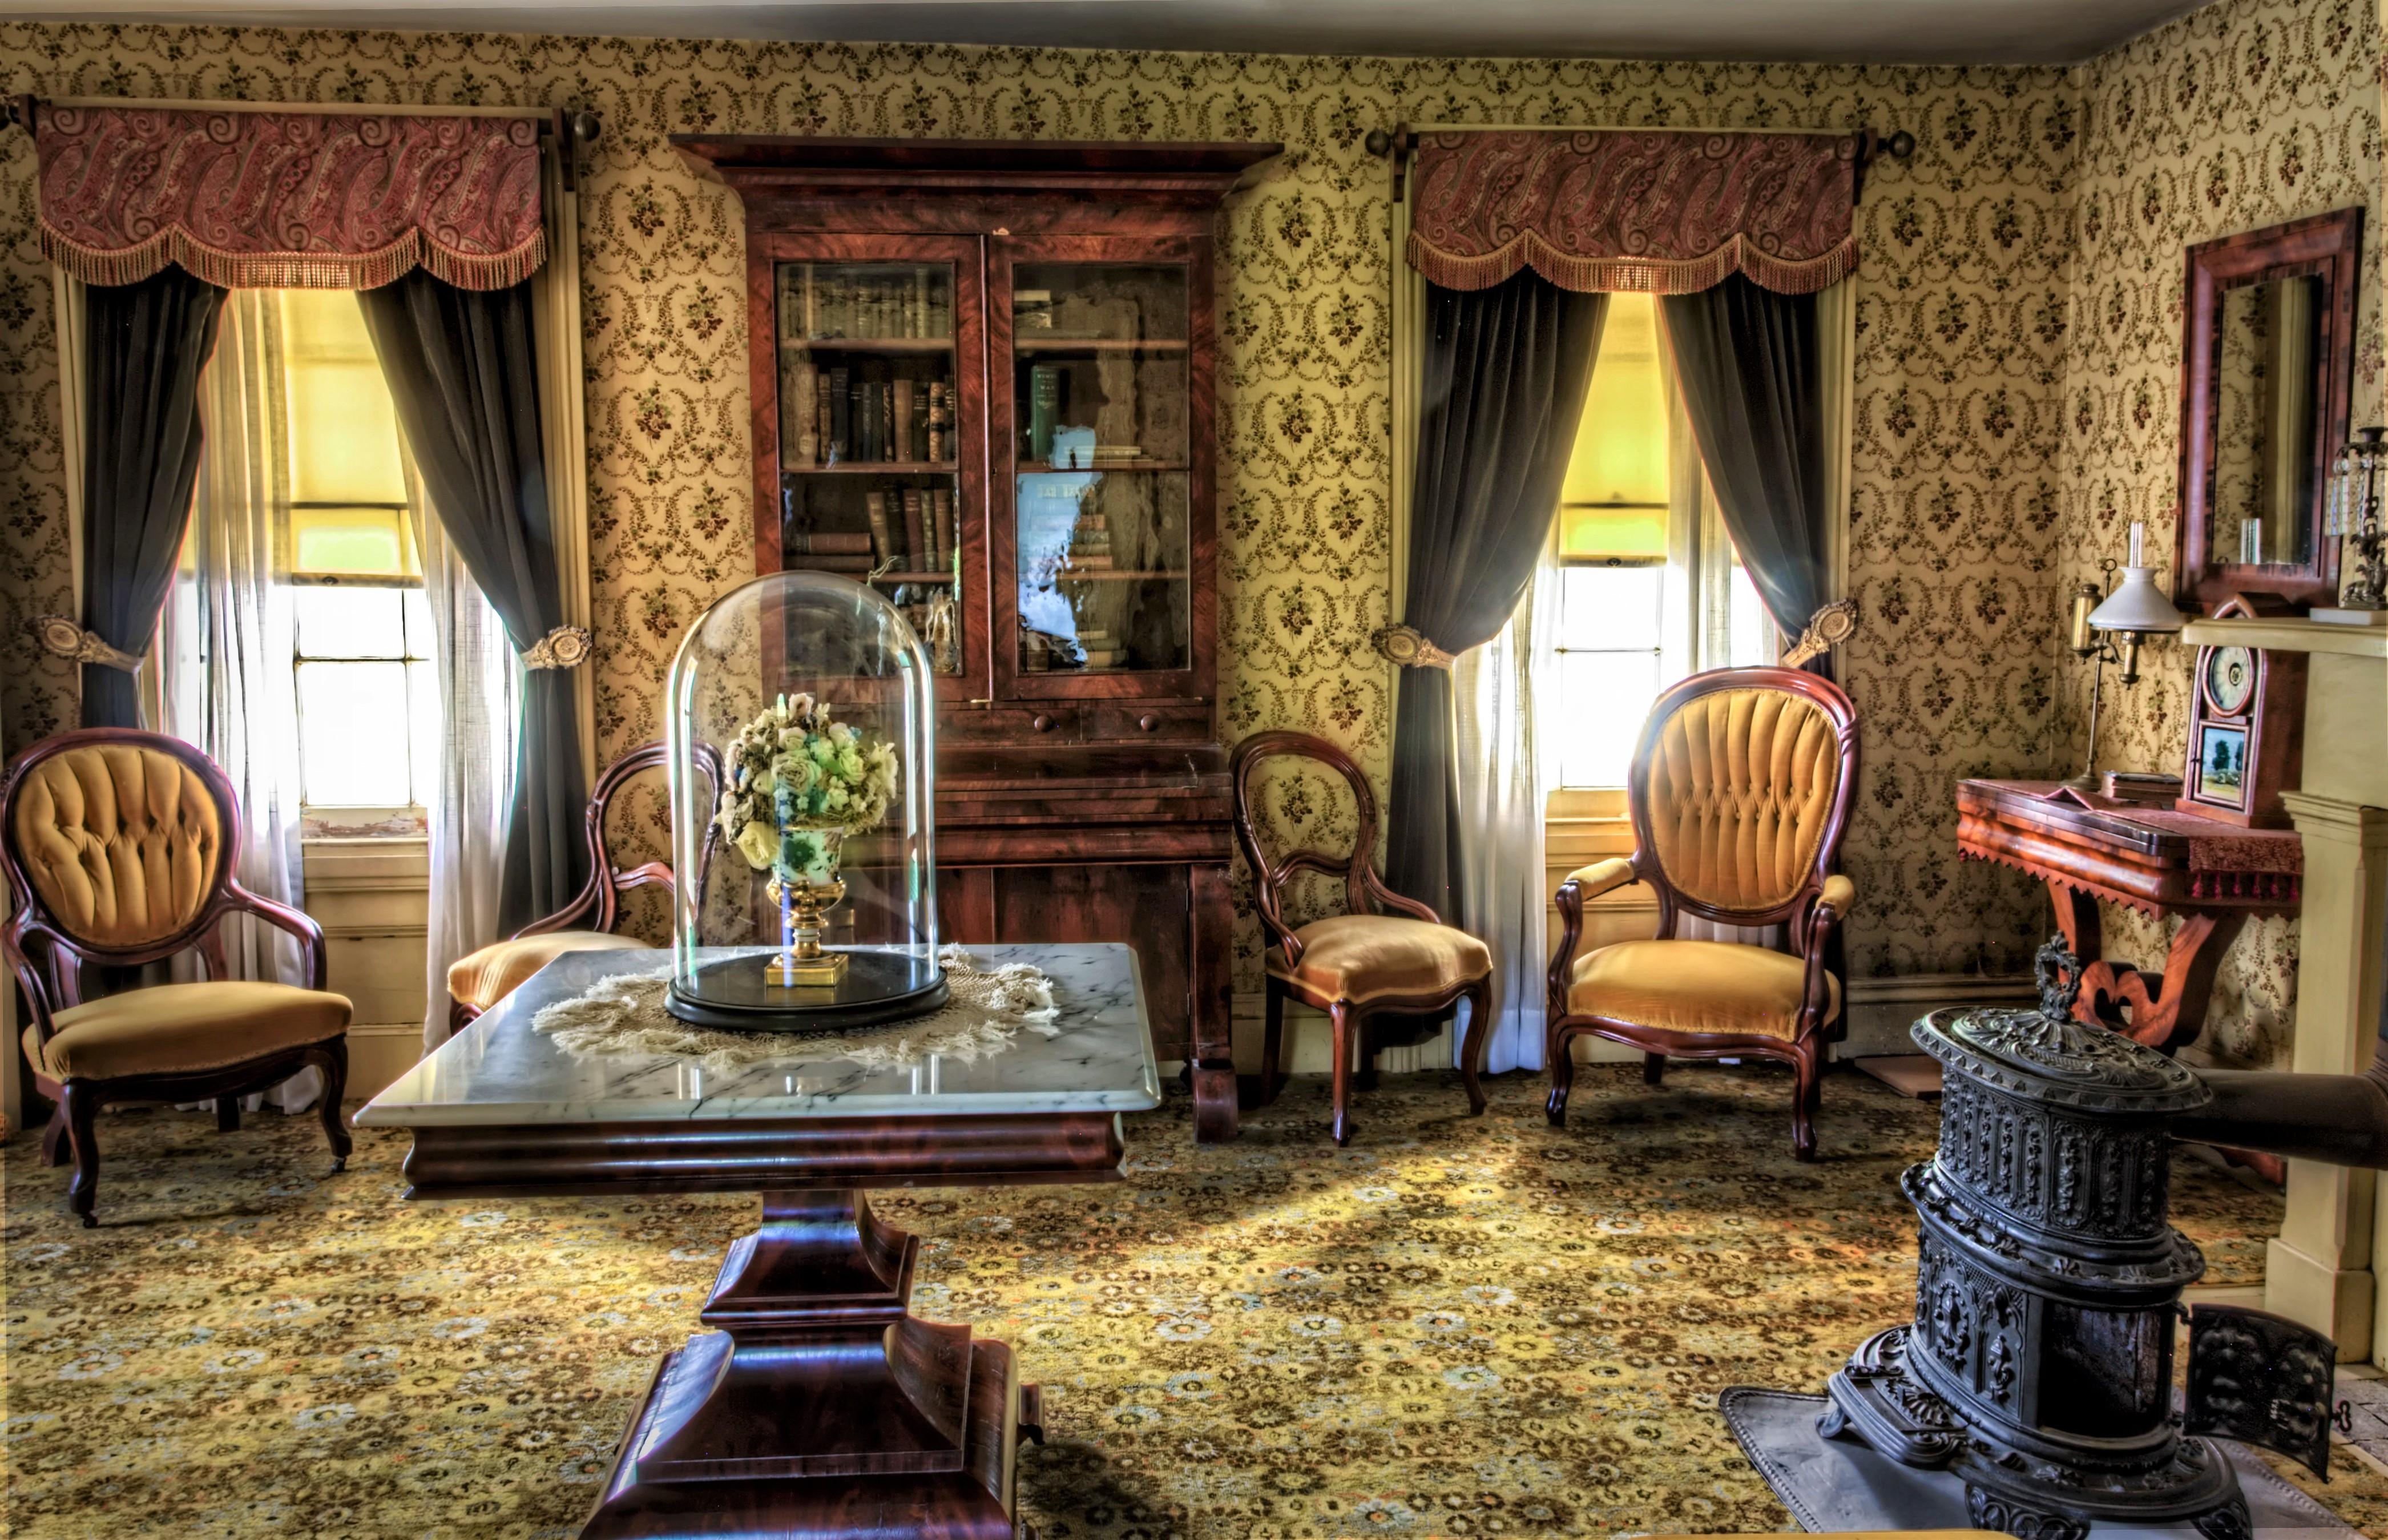 Room In Victorian Mansion 4k Ultra HD Wallpaper. Background